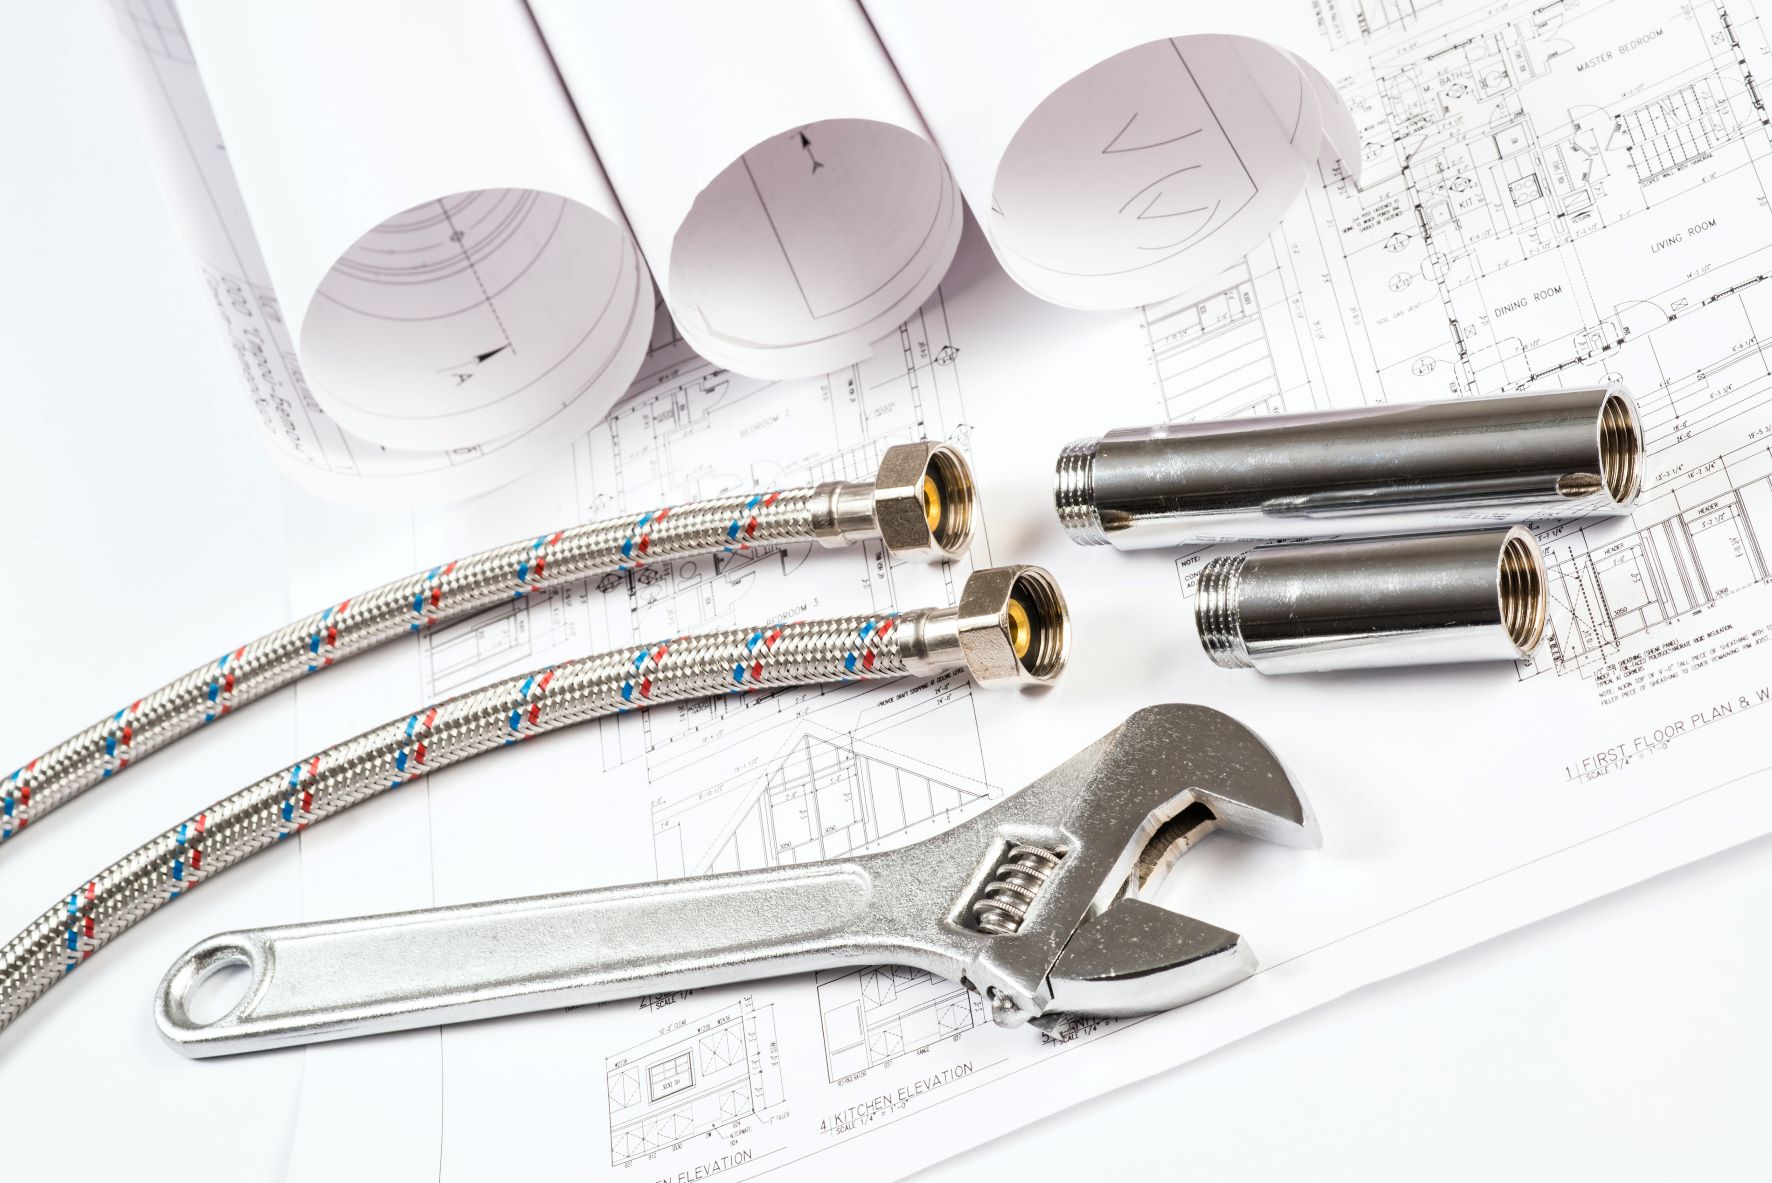 What are the do's and don'ts of plumbing